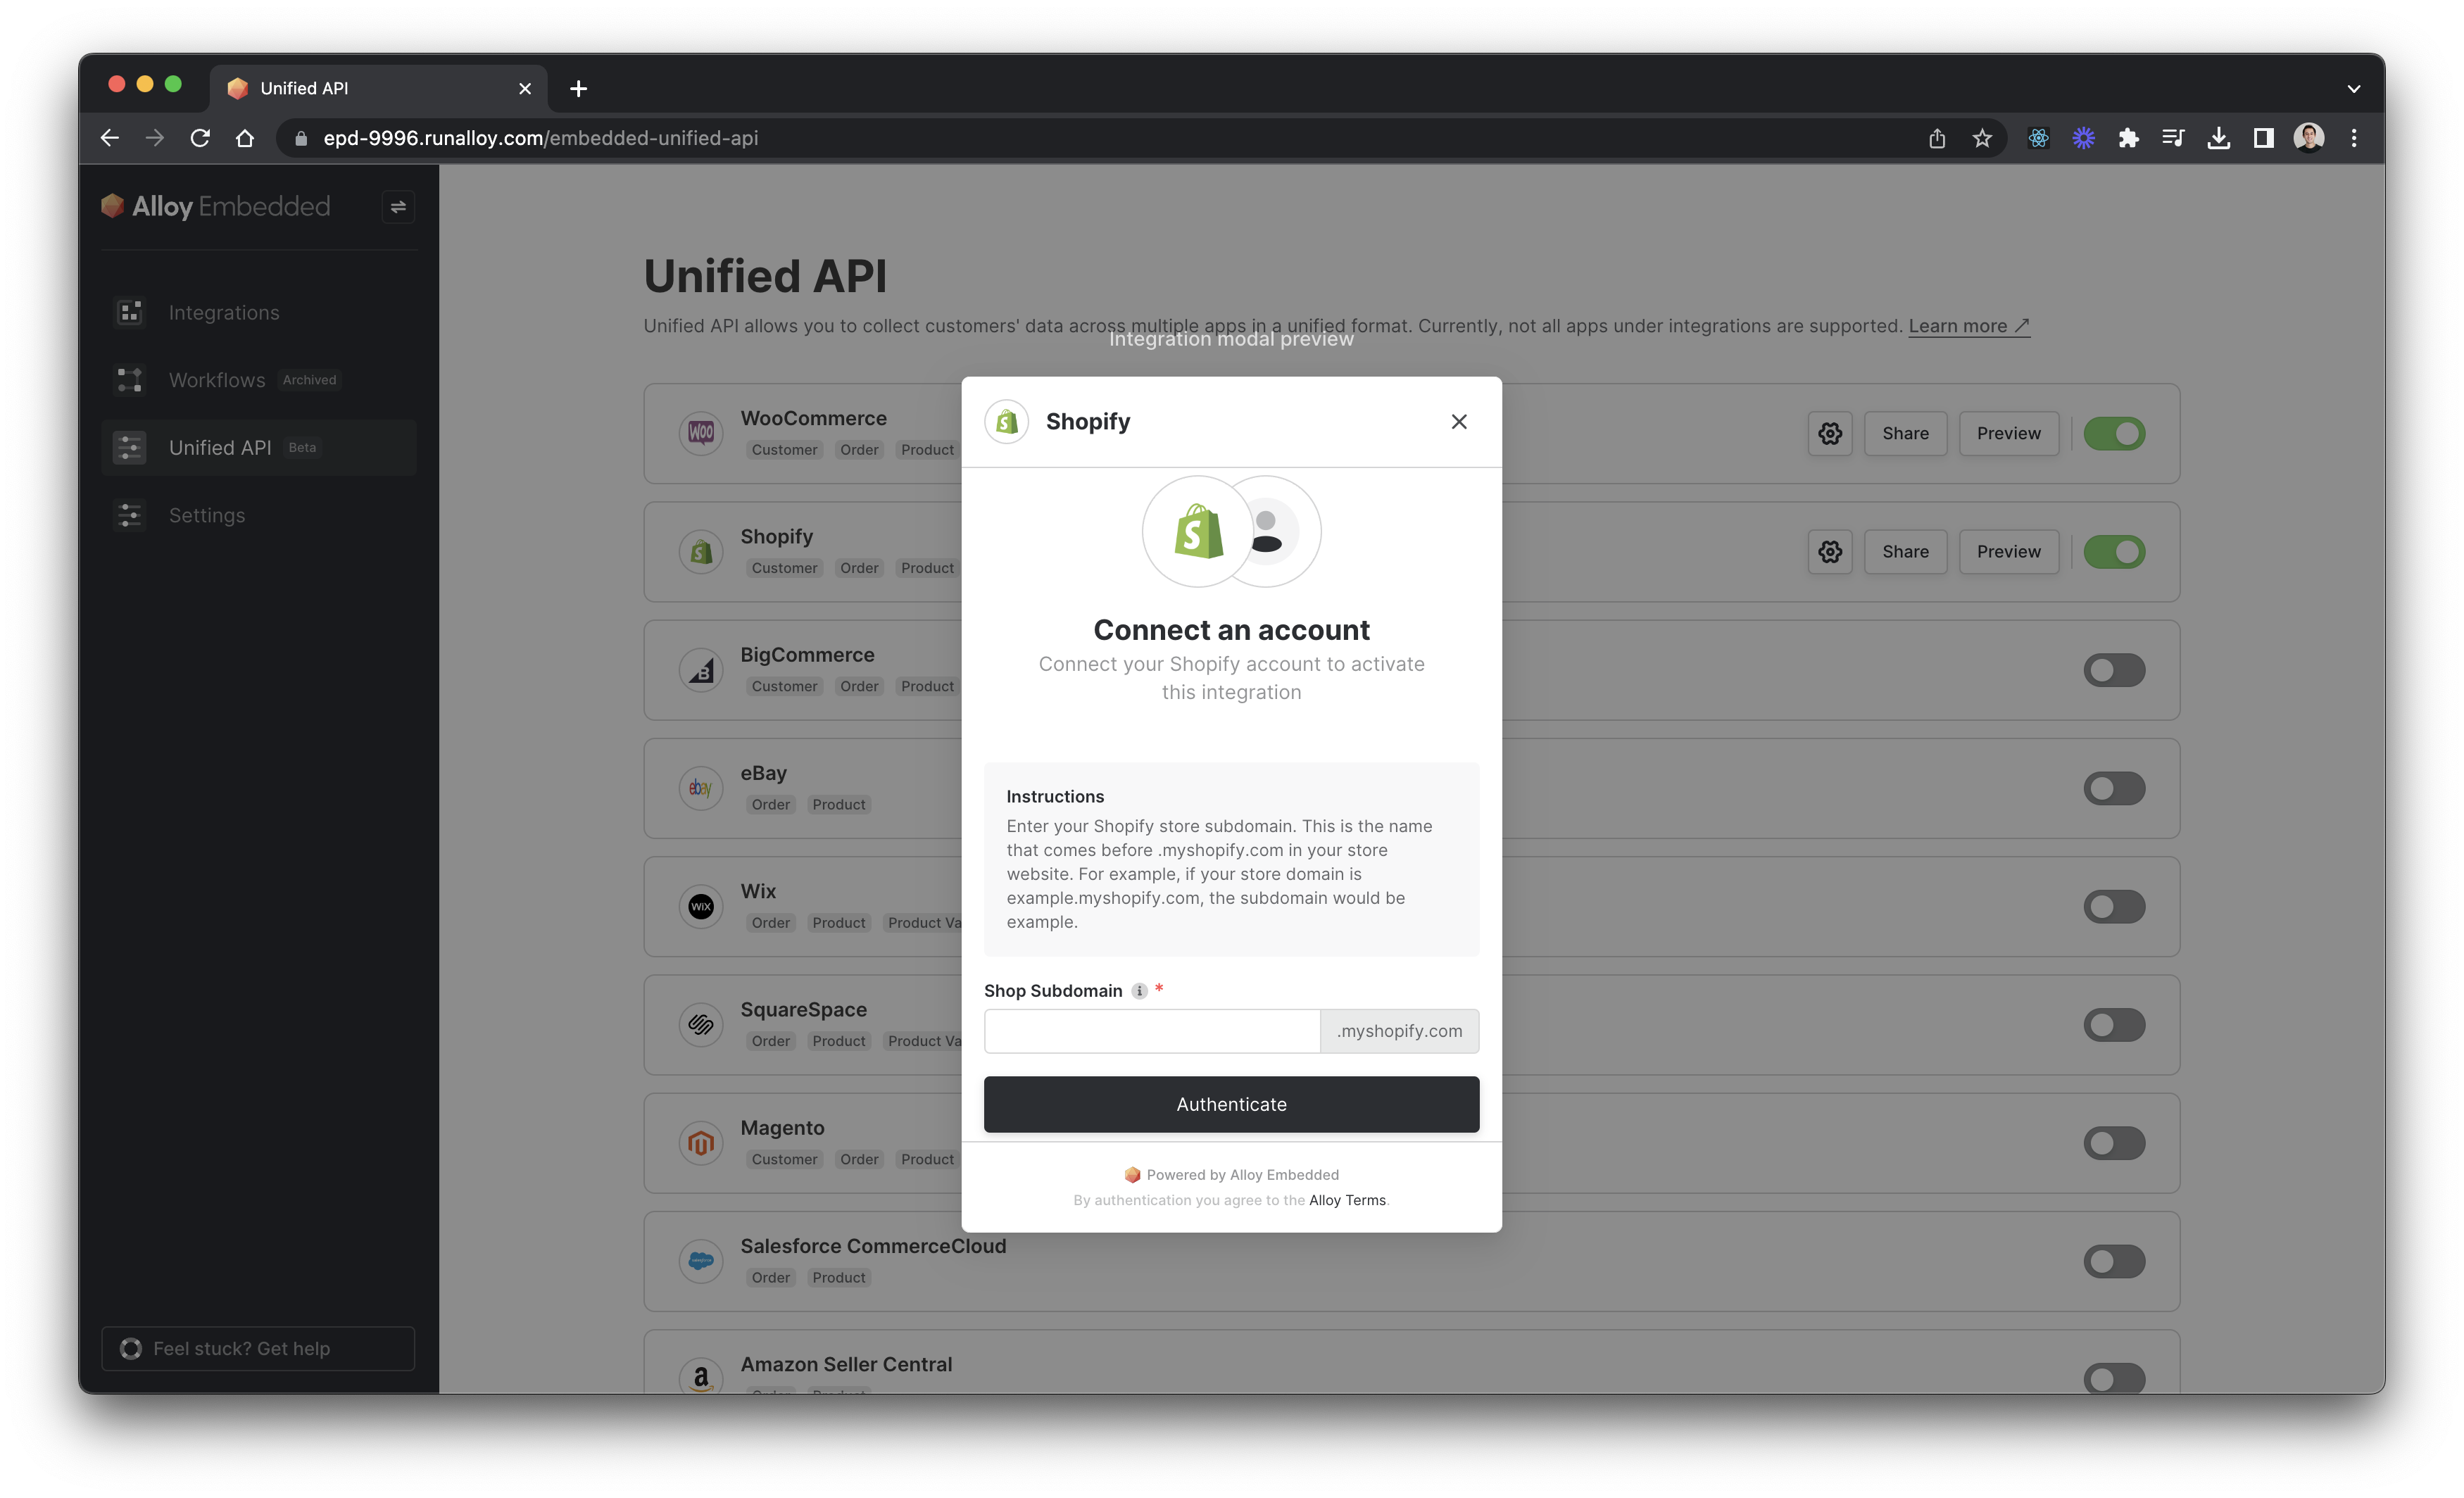 Your end-users authenticate integrations using the Alloy Modal.